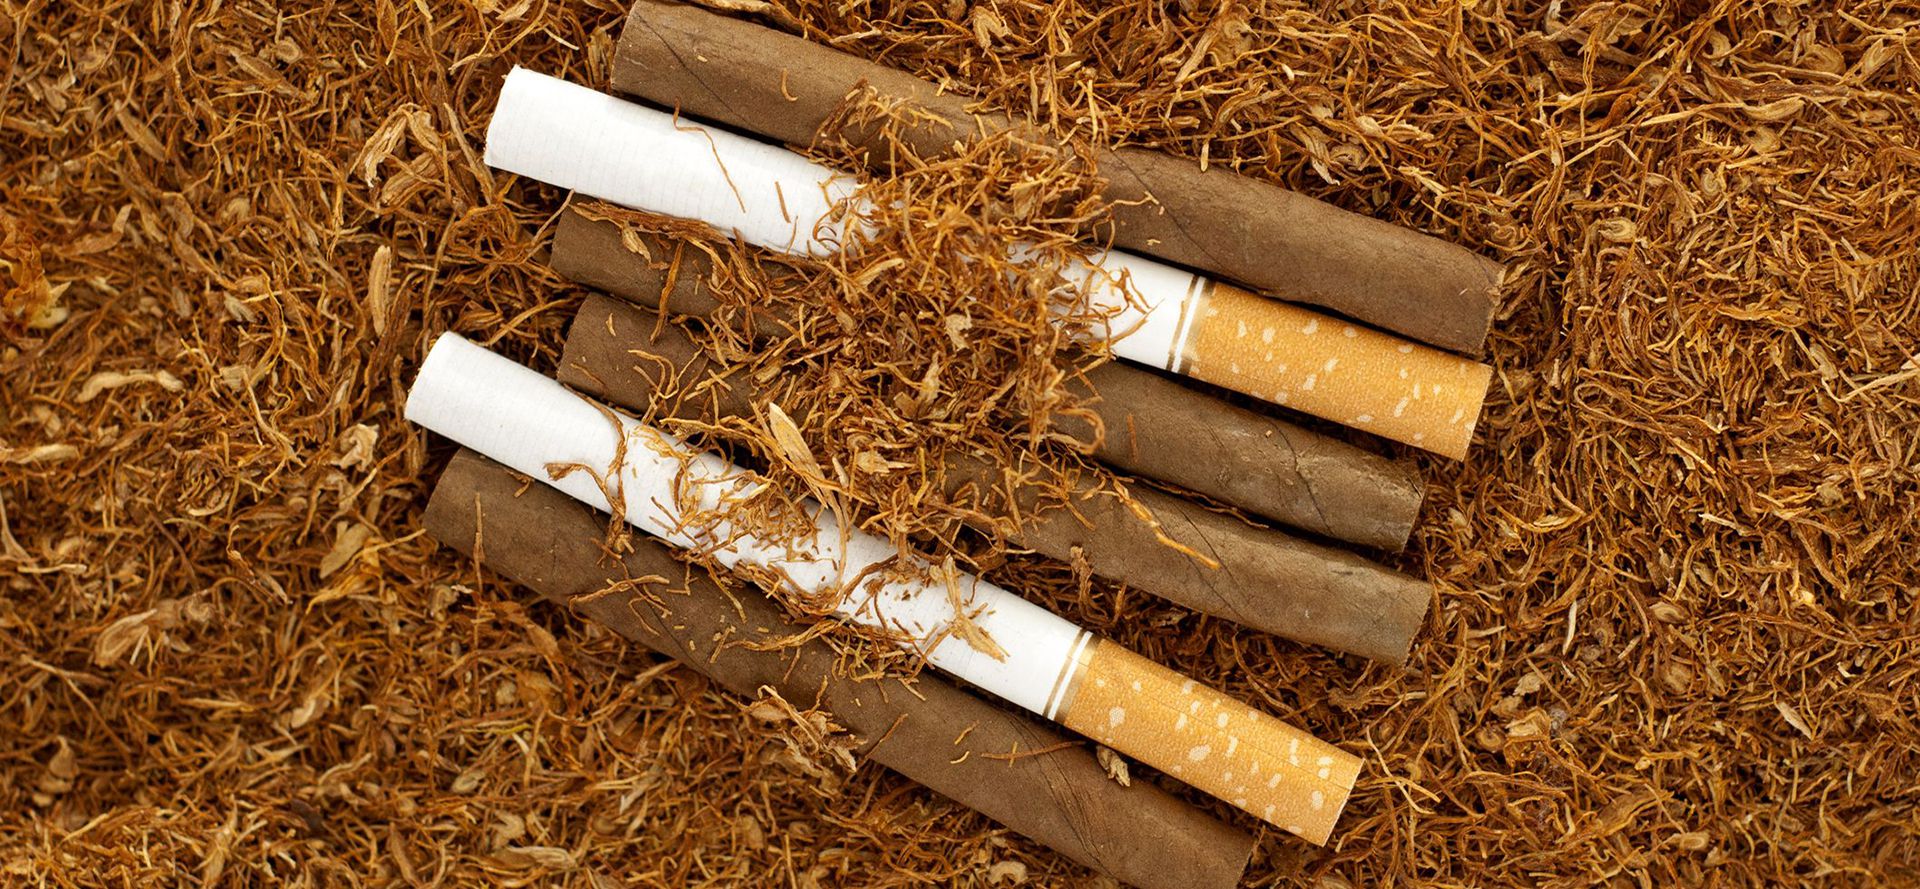 What is the difference between cigars and cigarettes